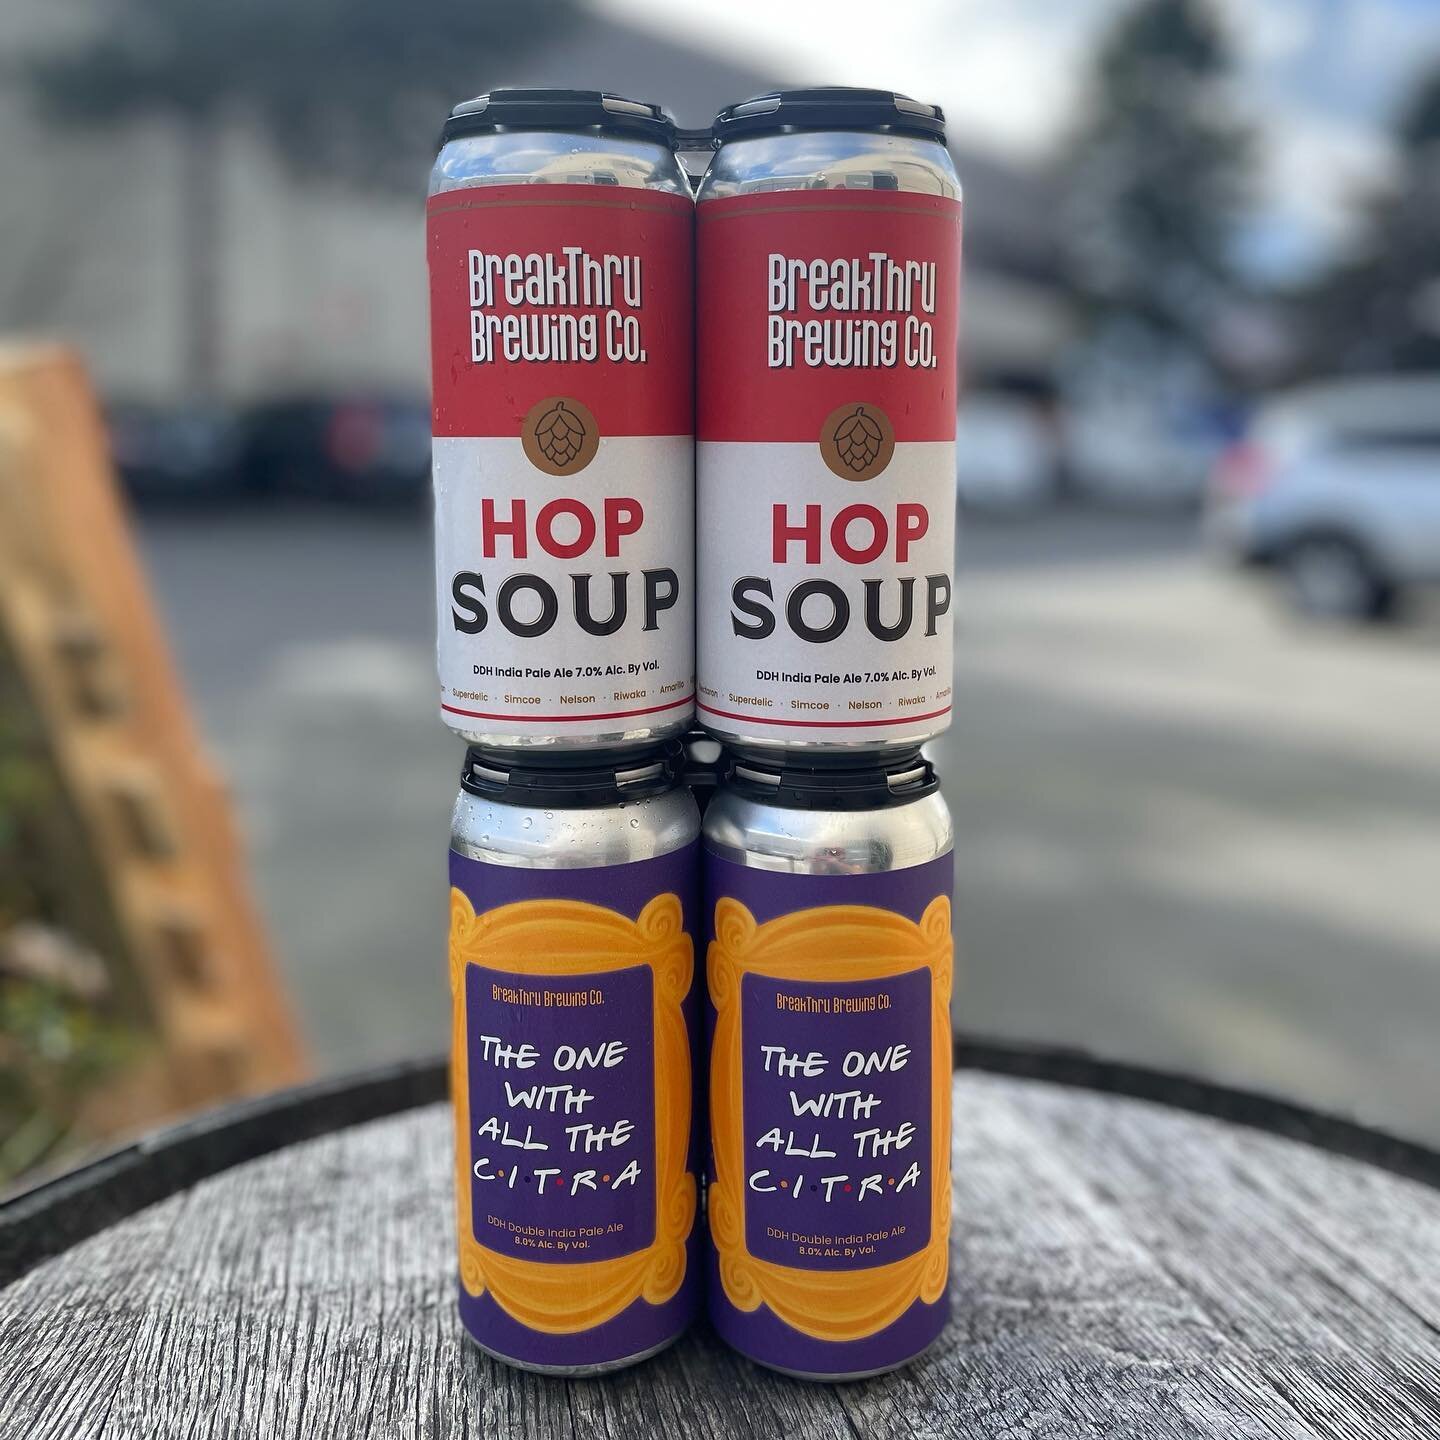 Tomorrow&rsquo;s the day!! Both cans go on sale @stoupbrewing in Ballard at 12 noon! A bit of info on each beer; 

Hop Soup was conceptualized  after drinking a wonderful Hoppy Ale from @troonbrewing called Litany of Failures. The brewery rarely dips